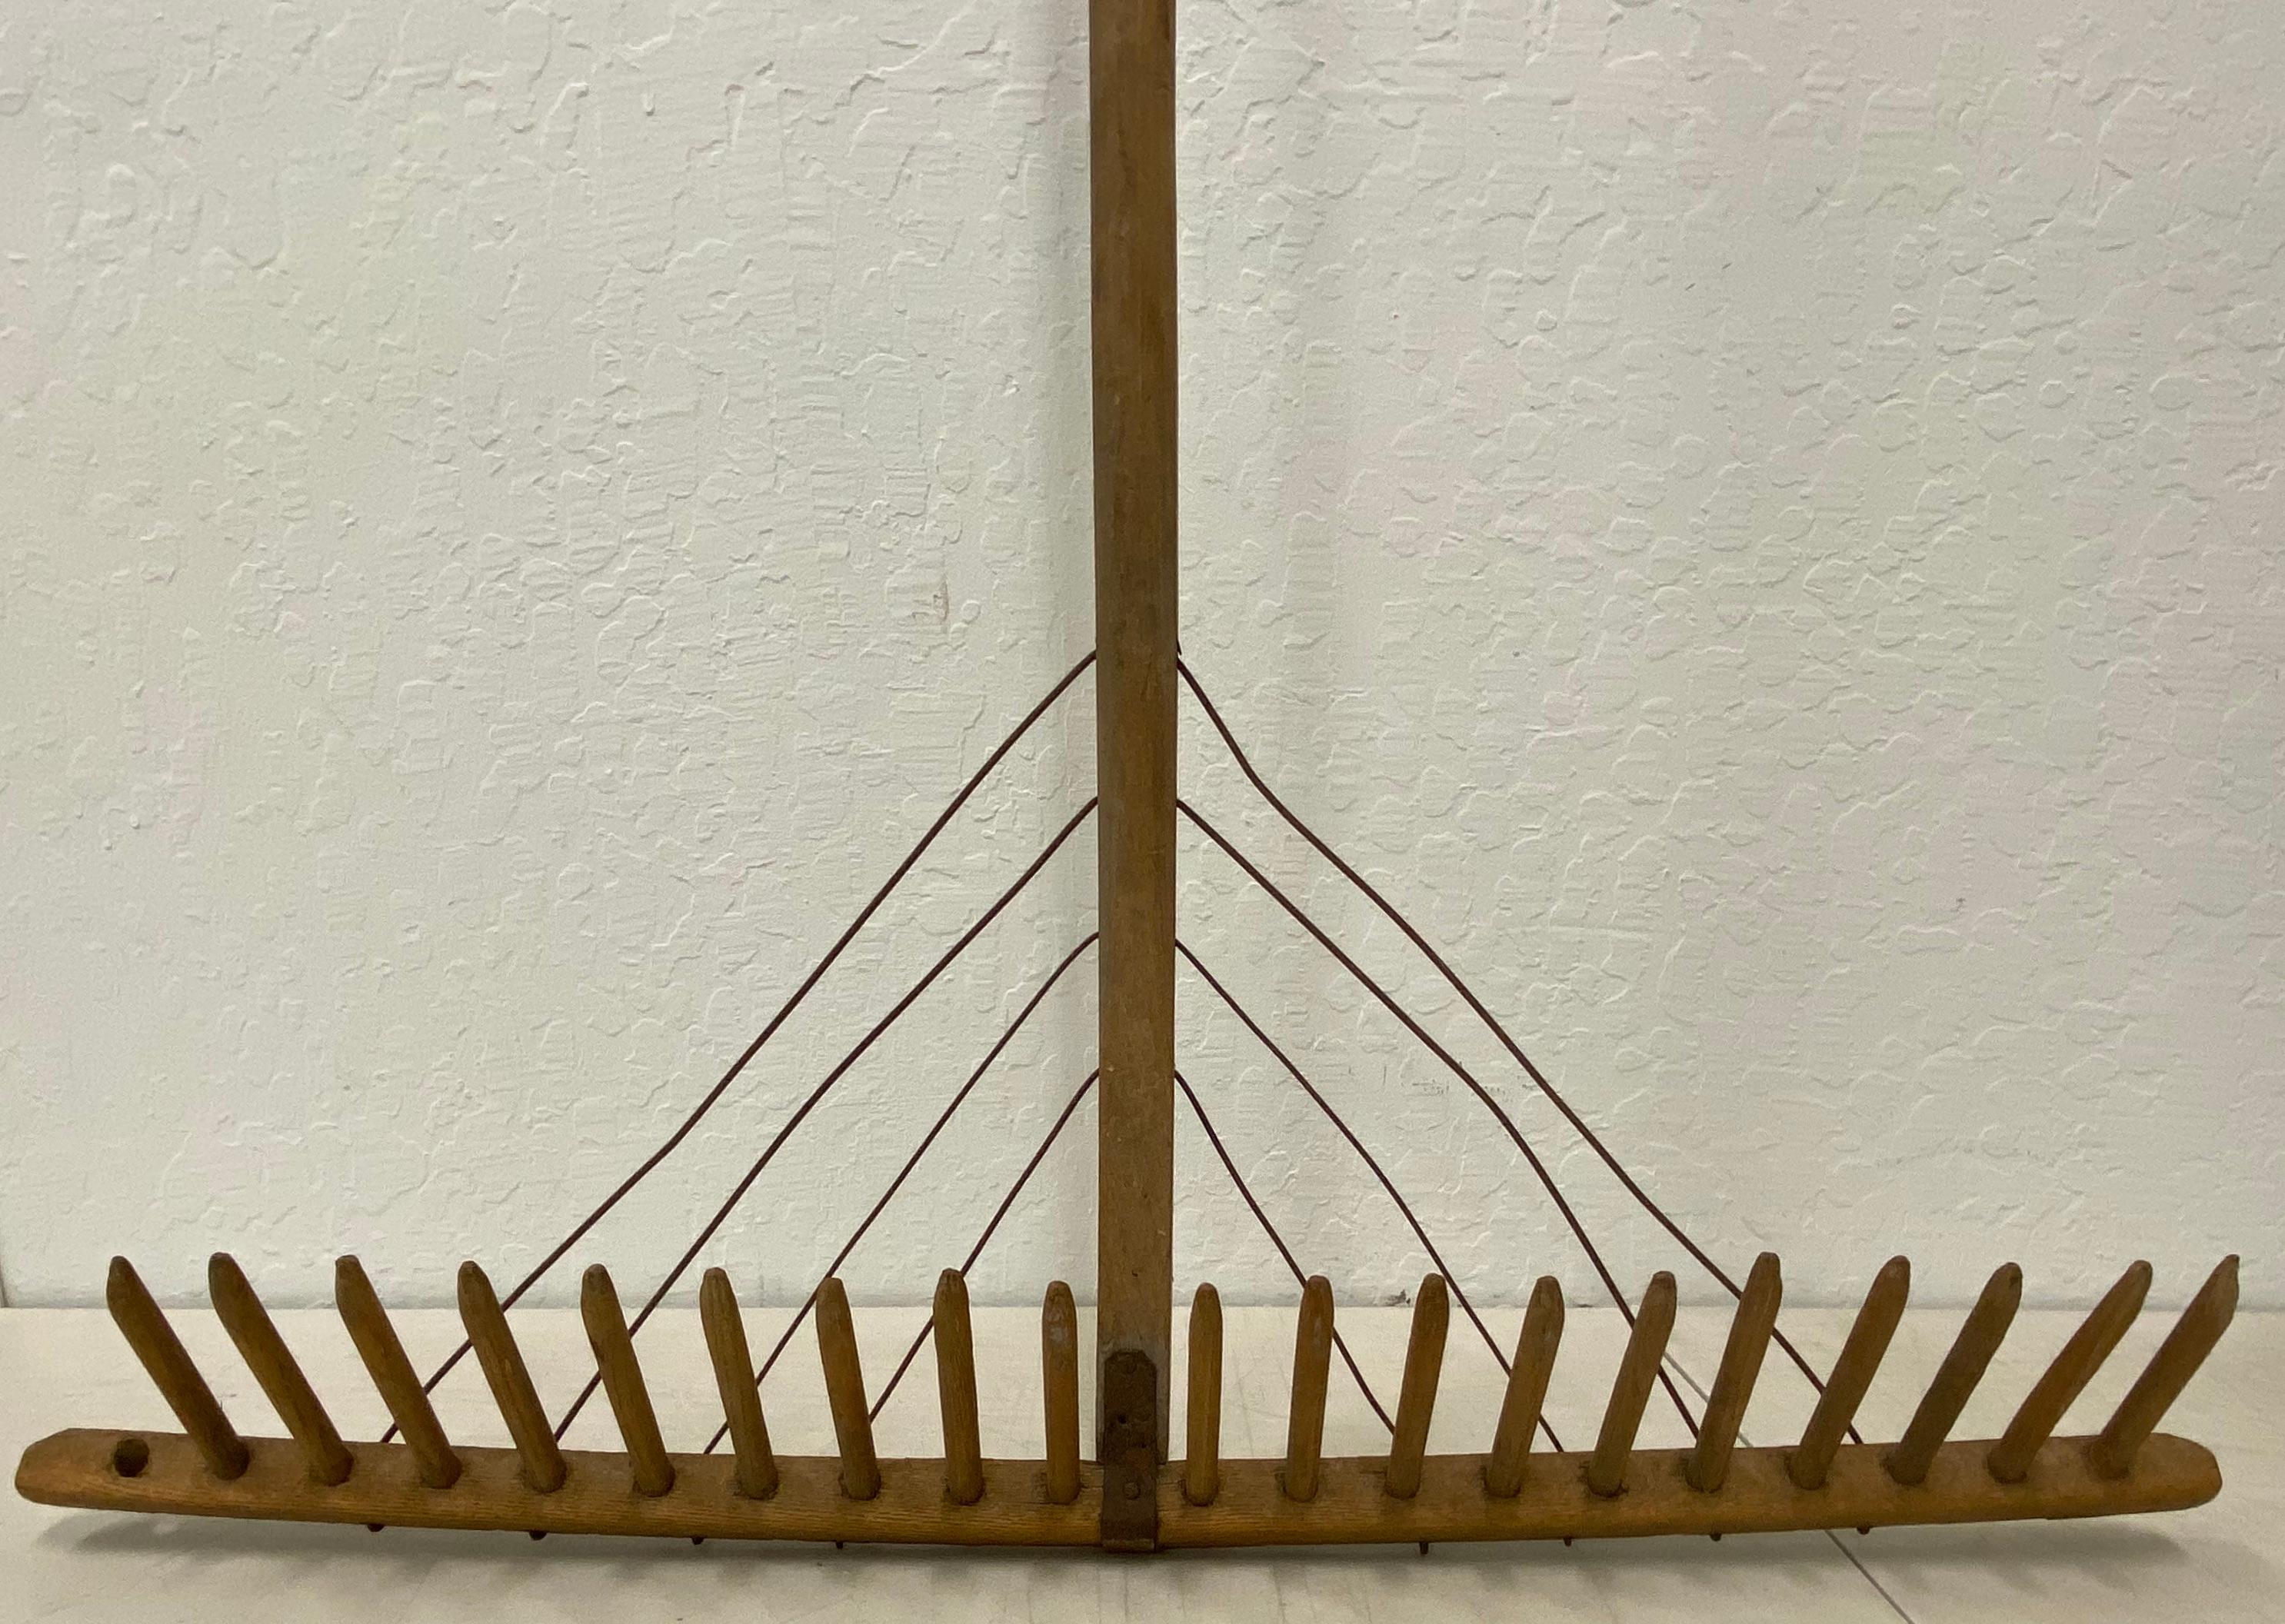 19th century handcrafted leaf rake

The rake is in fantastic antique condition with one single end tine missing (see pics)

The rake measures 30